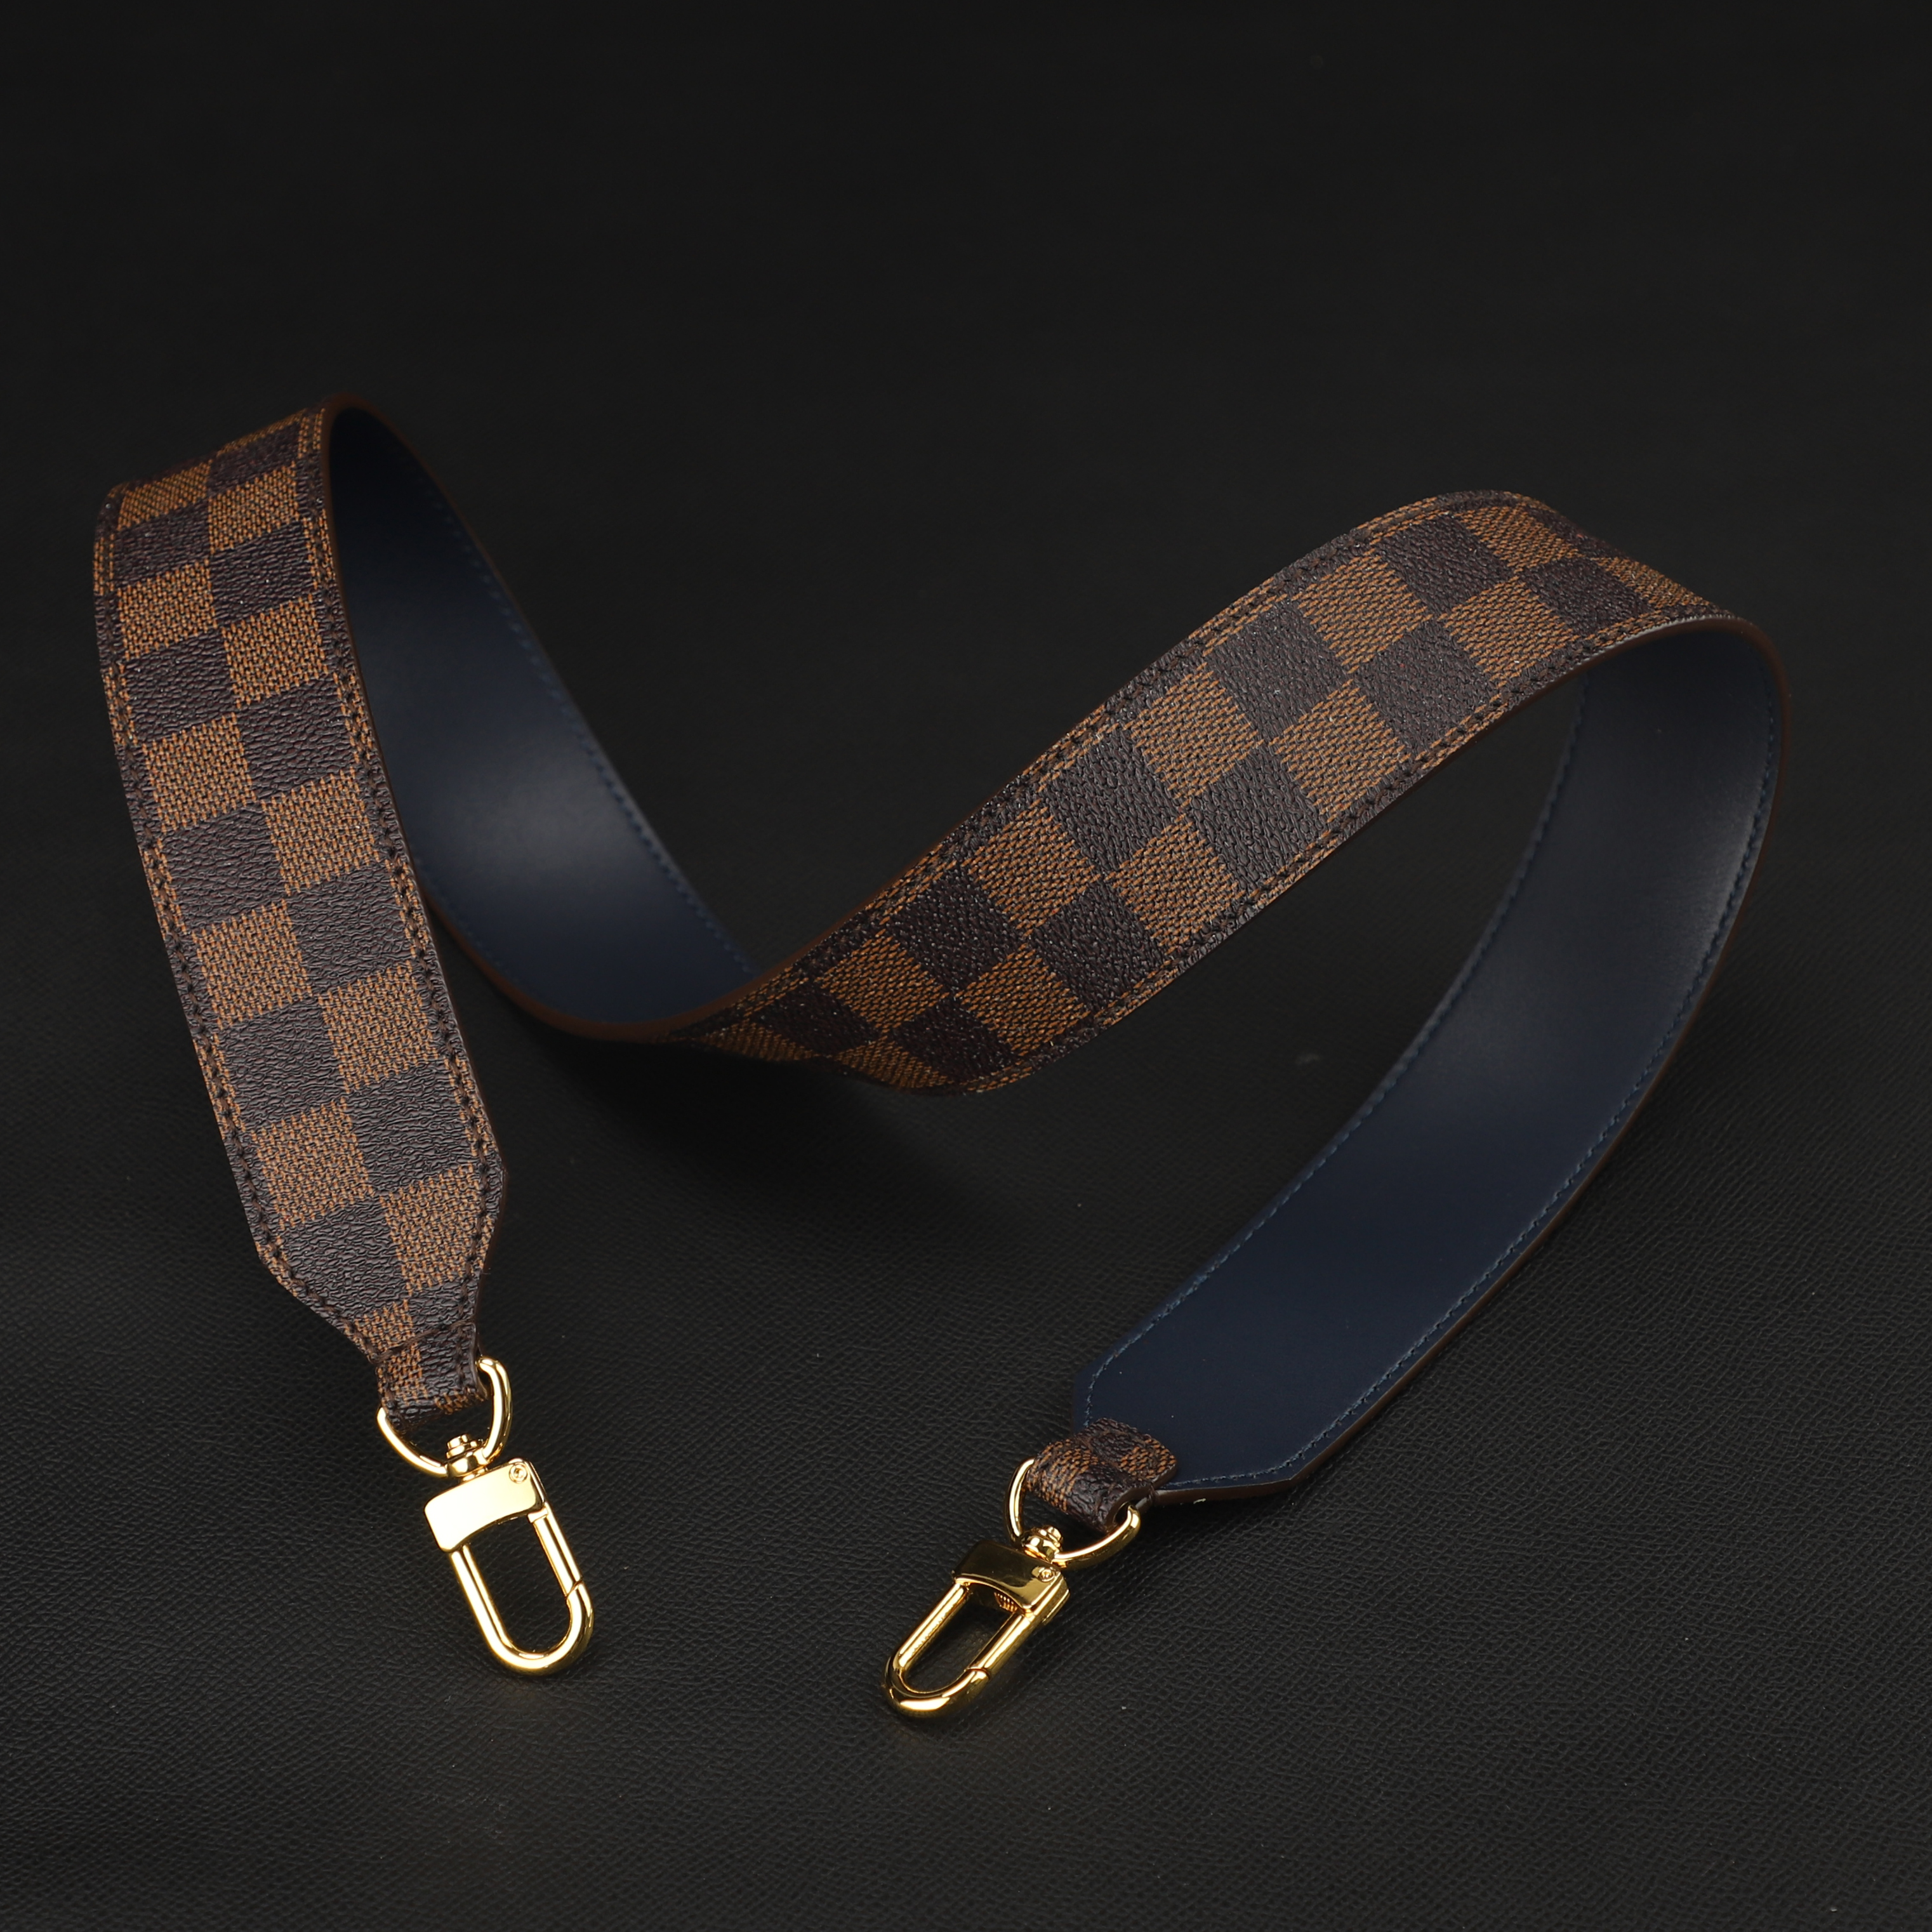 Customized and Handmade The Damier Ebene Greenwich Shoulder Strap,Cros